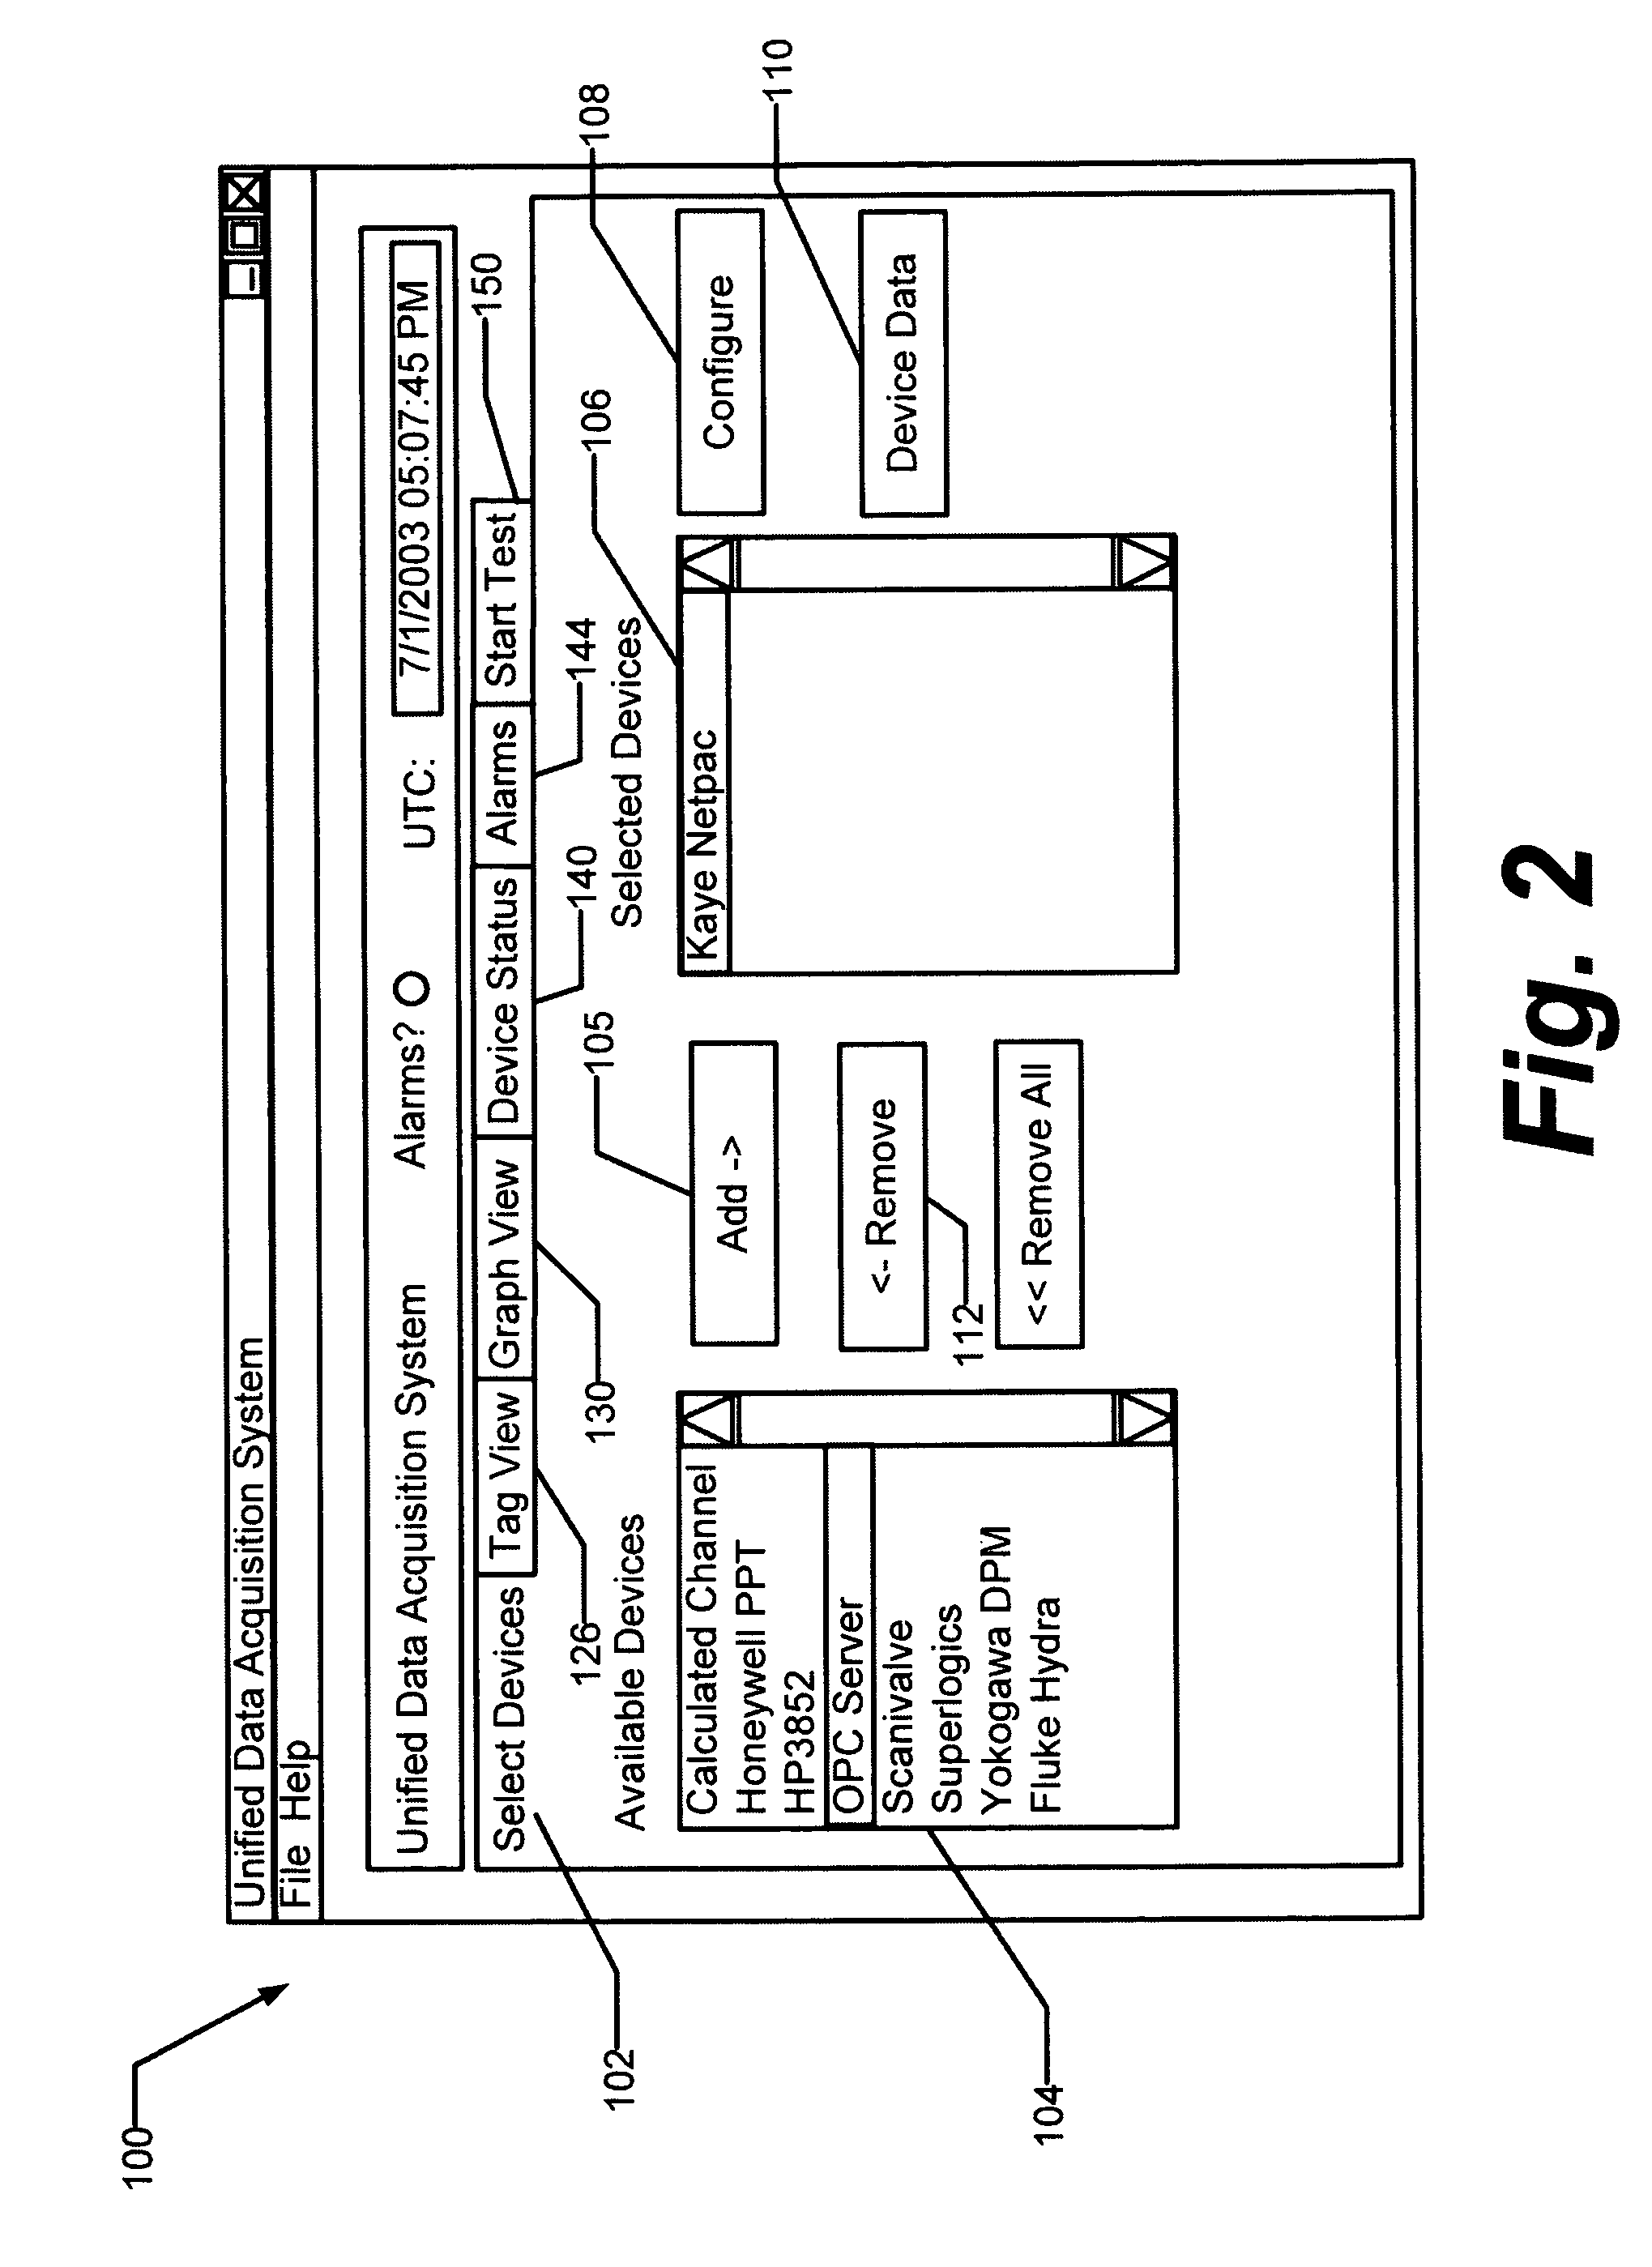 Unified data acquisition system and method